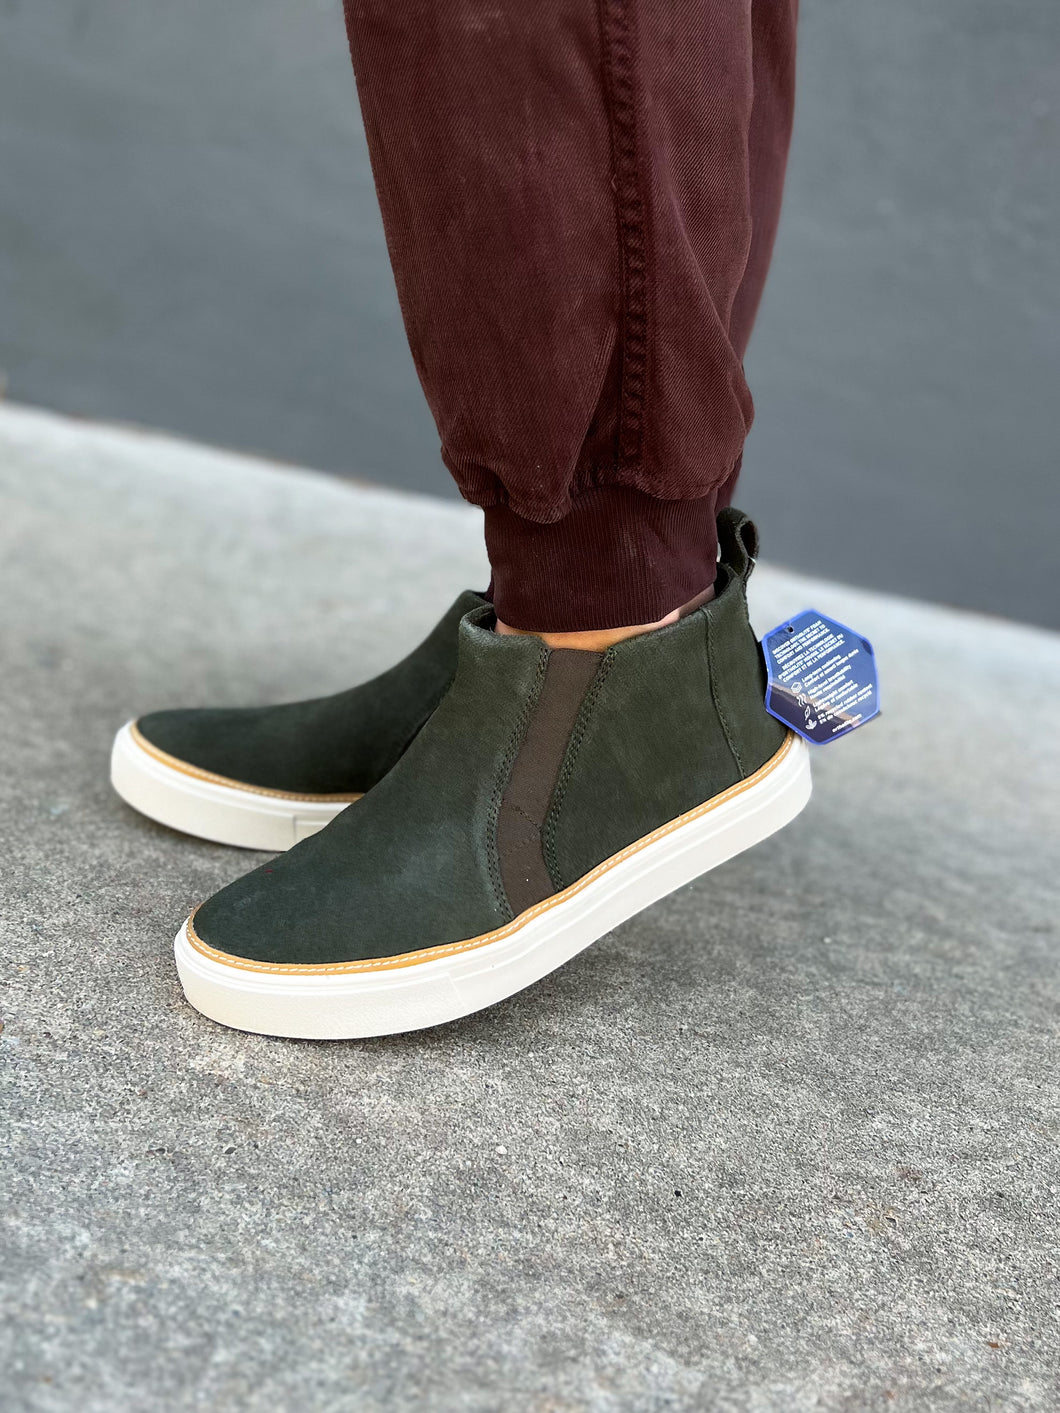 Toms: Bryce Tarmac Olive Suede